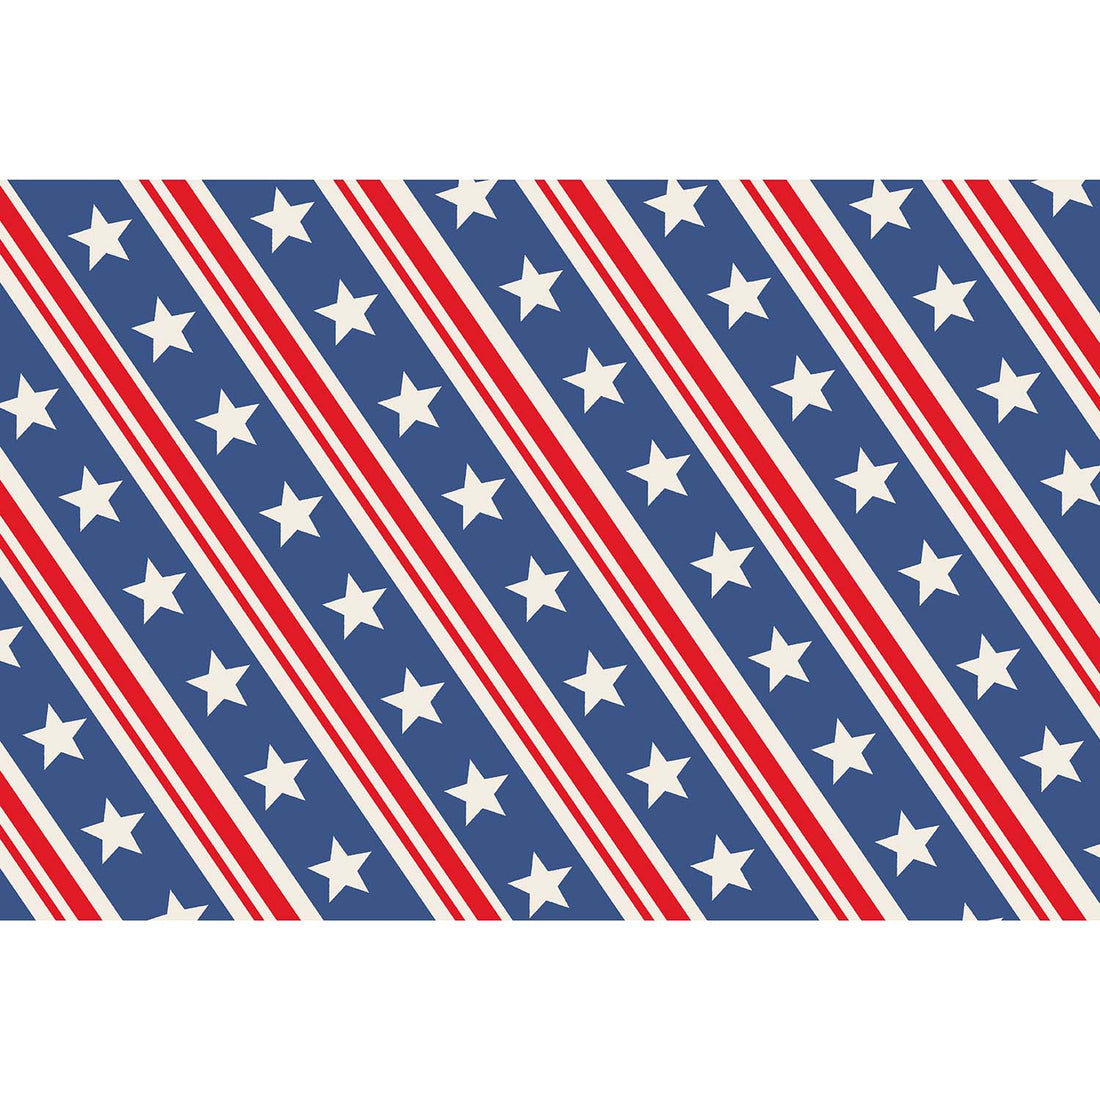 A repeating pattern of diagonal blue stripes containing white stars, with red and white stripes between.